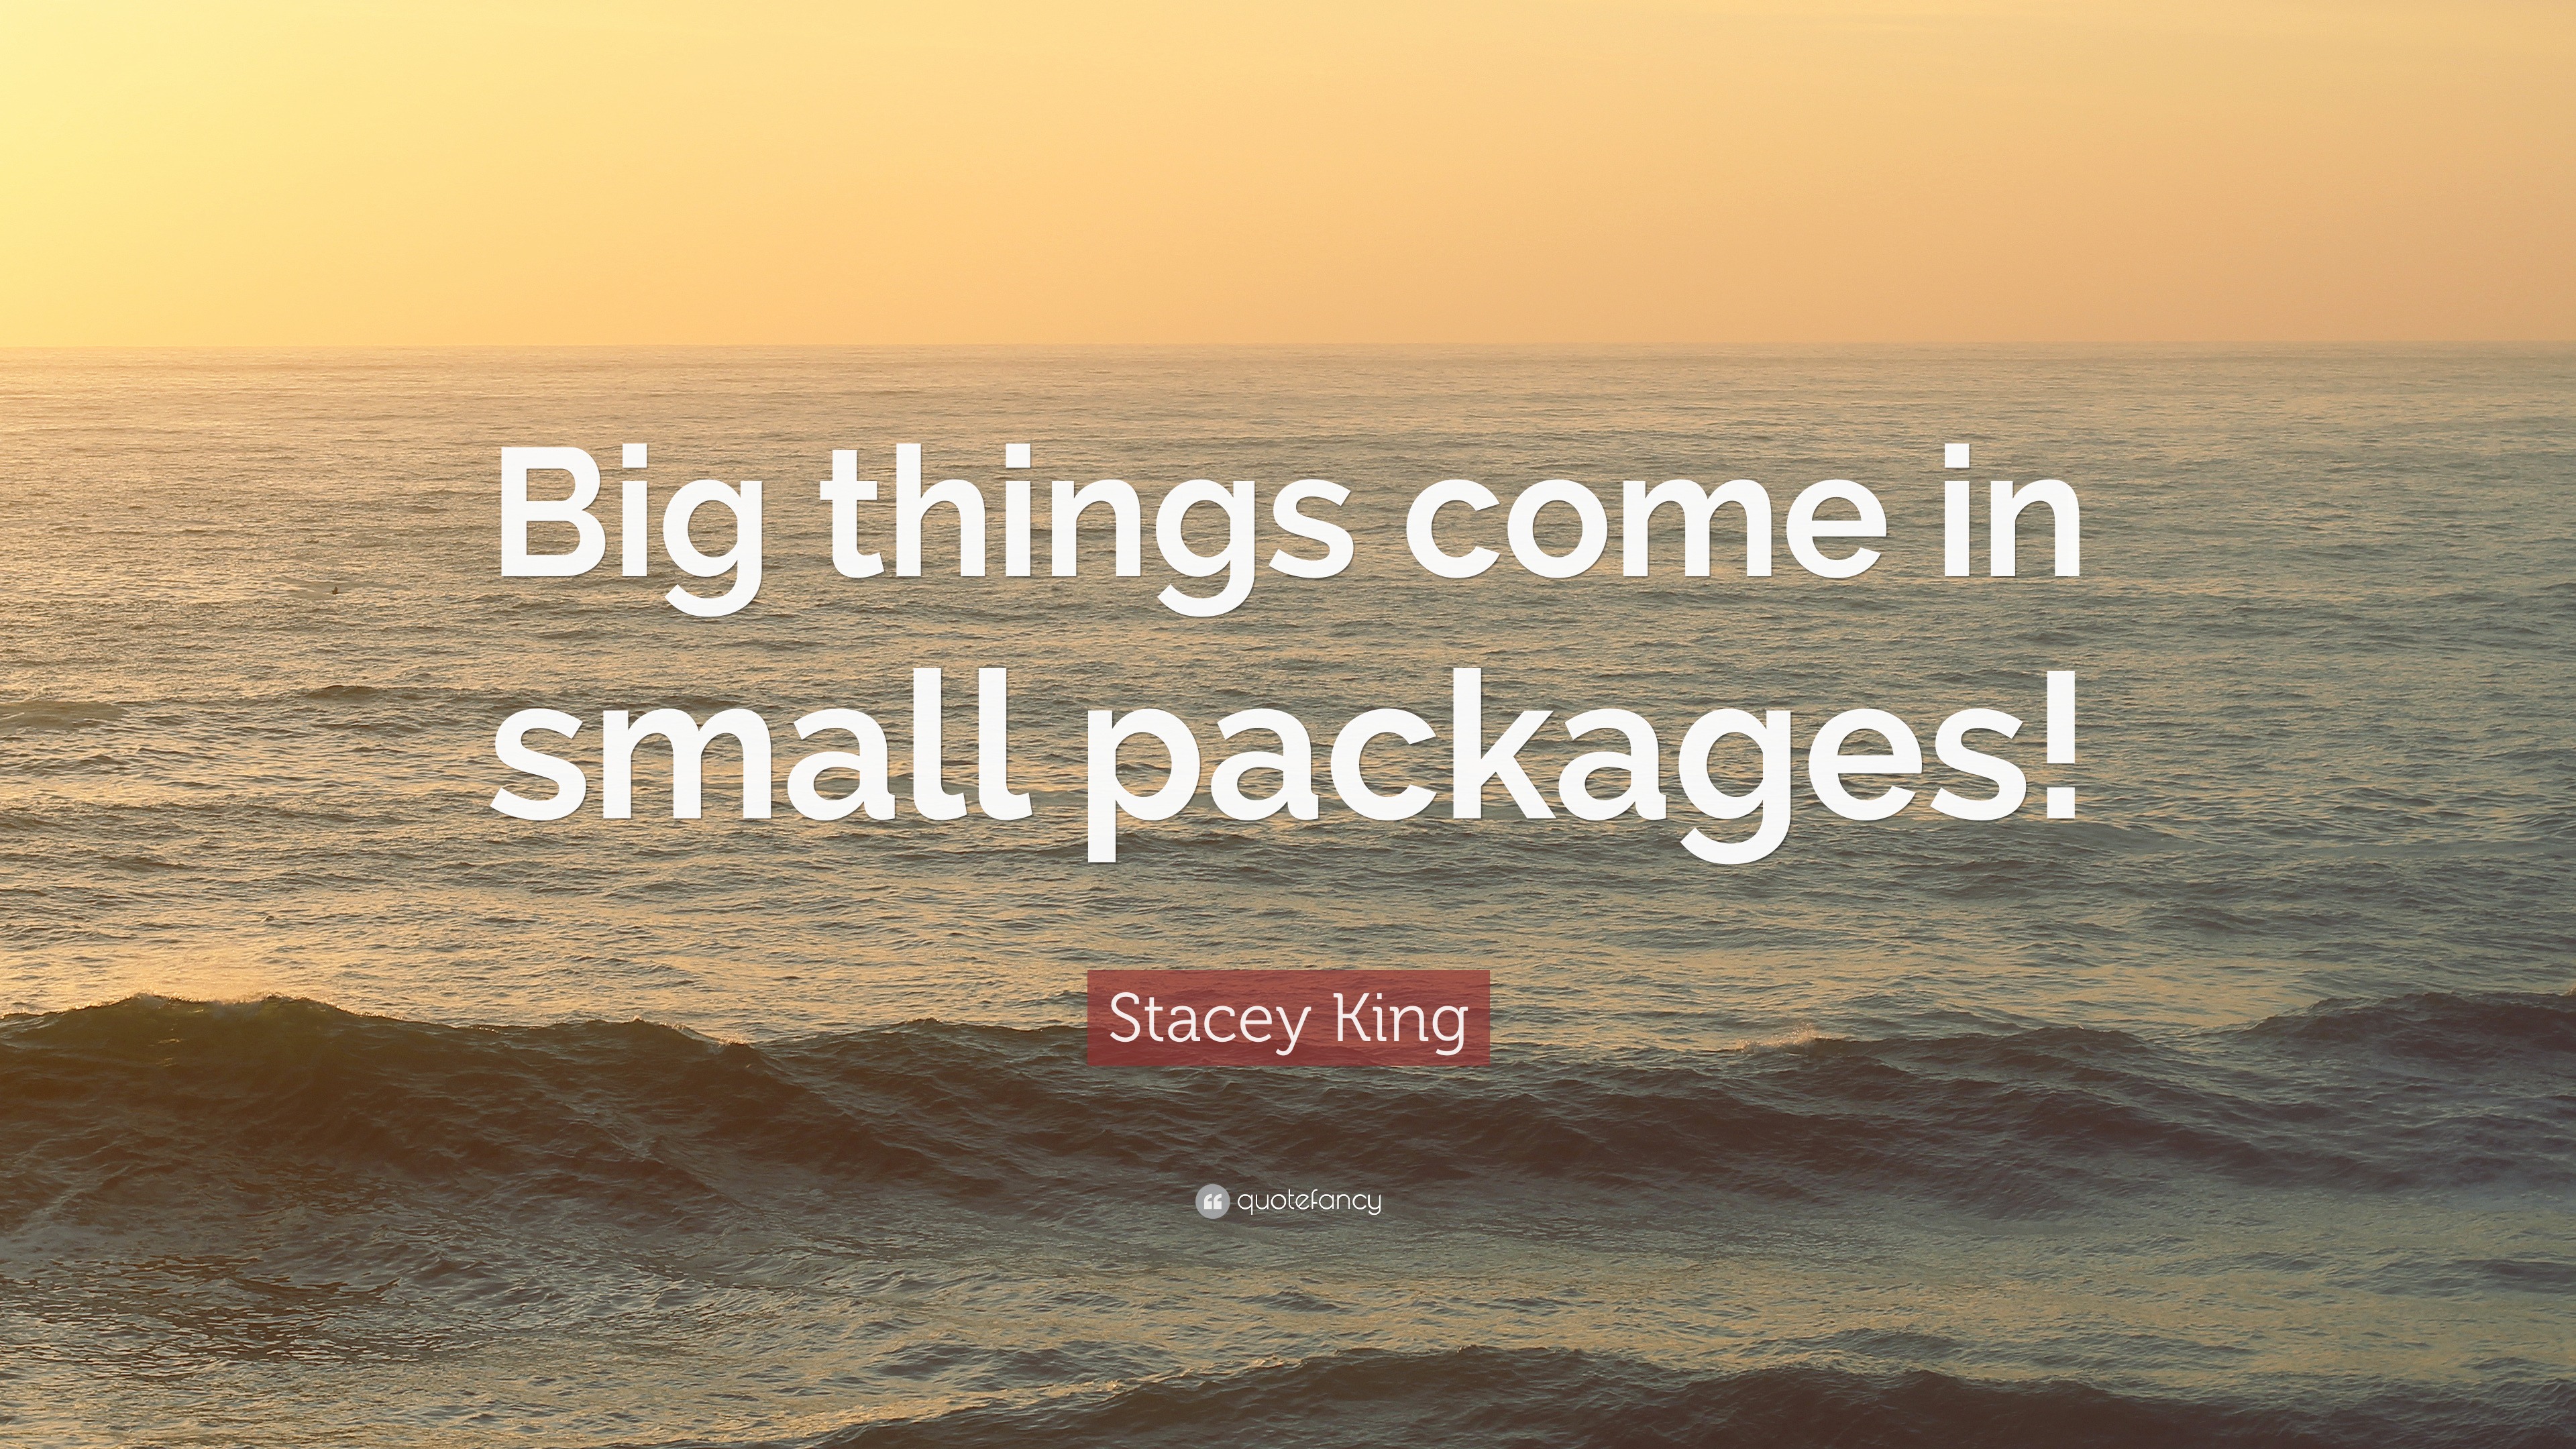 Stacey King Quote “Big things come in small packages!”